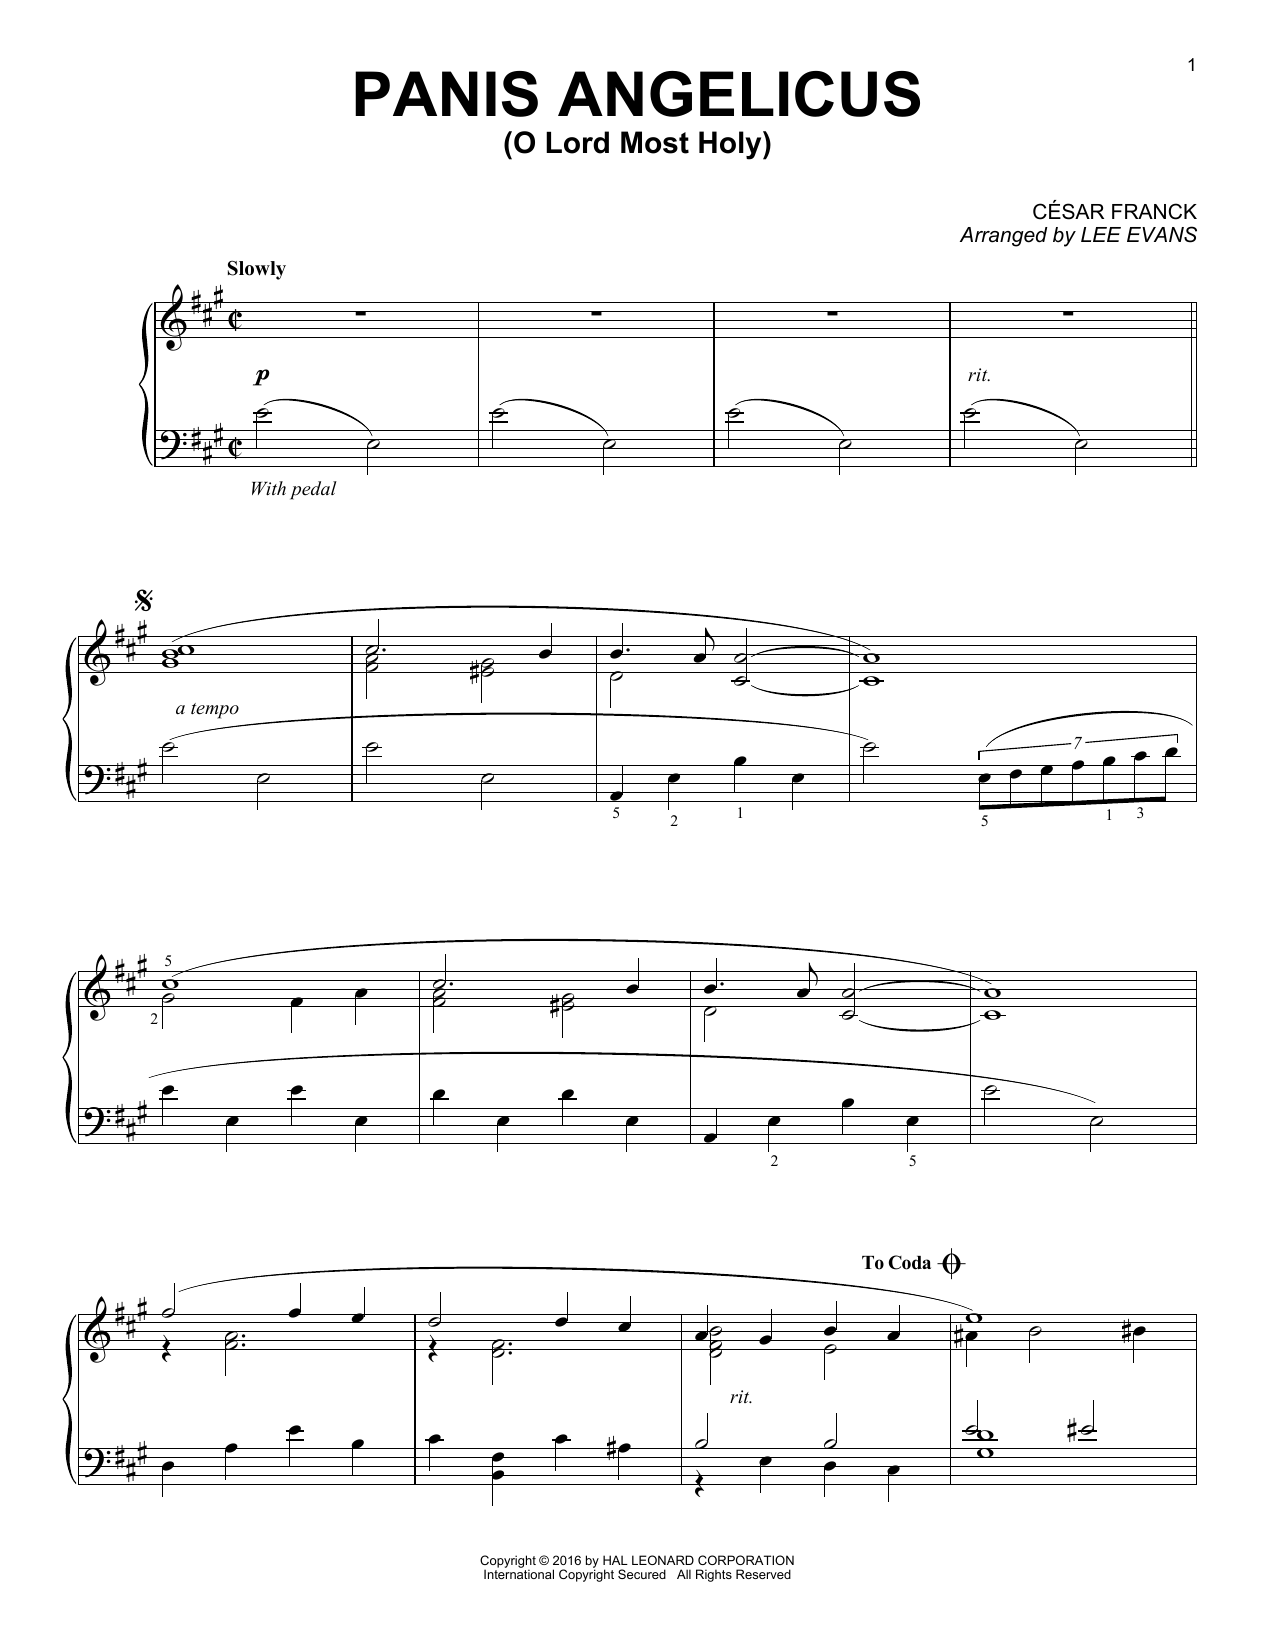 Download Lee Evans Panis Angelicus (O Lord Most Holy) Sheet Music